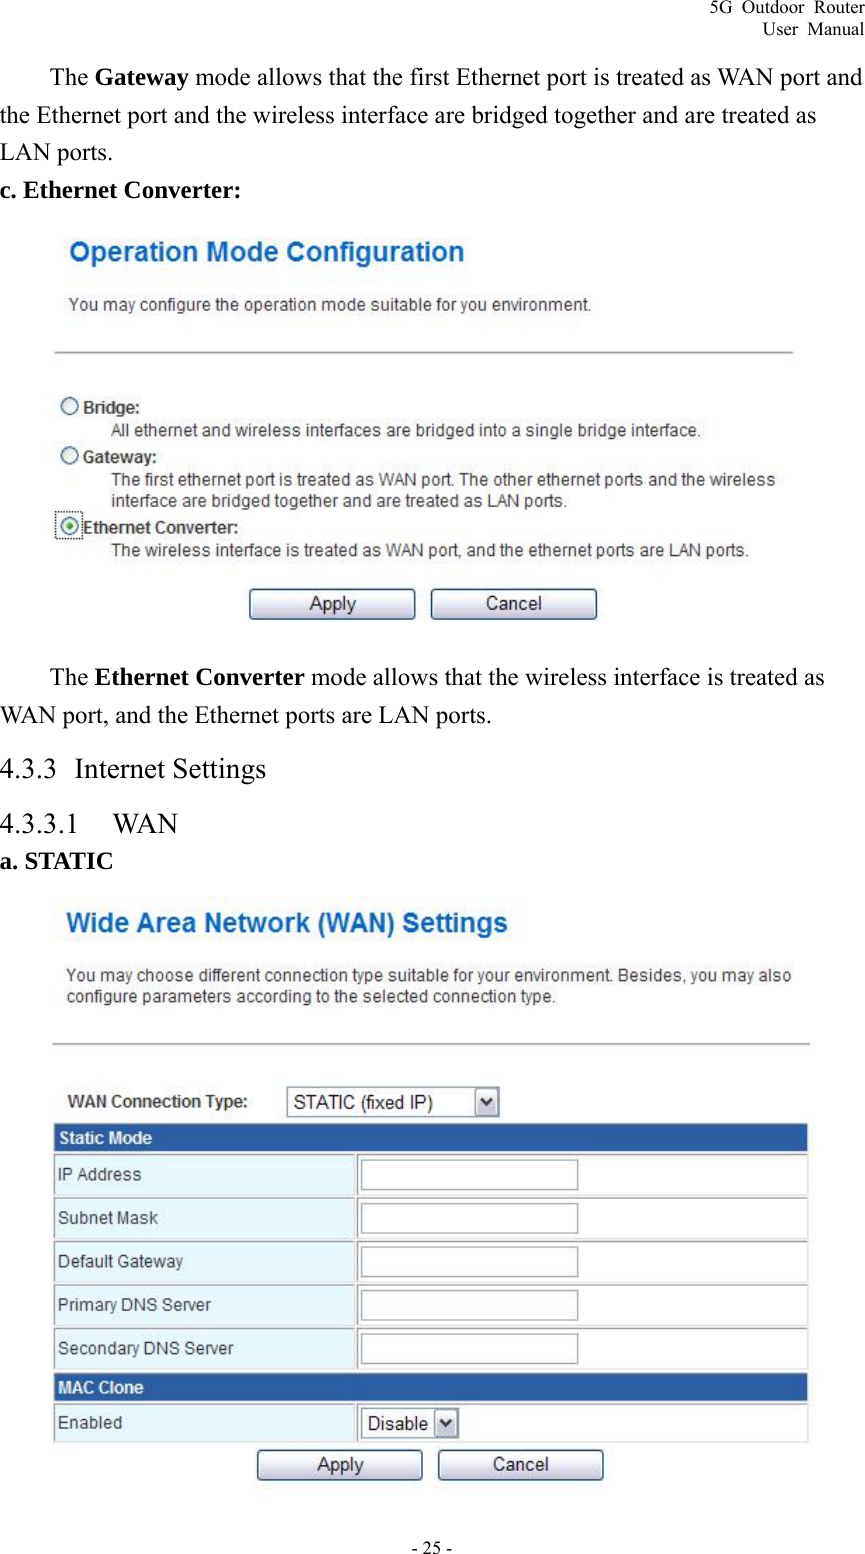 5G Outdoor Router User Manual - 25 - The Gateway mode allows that the first Ethernet port is treated as WAN port and the Ethernet port and the wireless interface are bridged together and are treated as LAN ports. c. Ethernet Converter:  The Ethernet Converter mode allows that the wireless interface is treated as WAN port, and the Ethernet ports are LAN ports. 4.3.3 Internet Settings 4.3.3.1 WAN  a. STATIC  